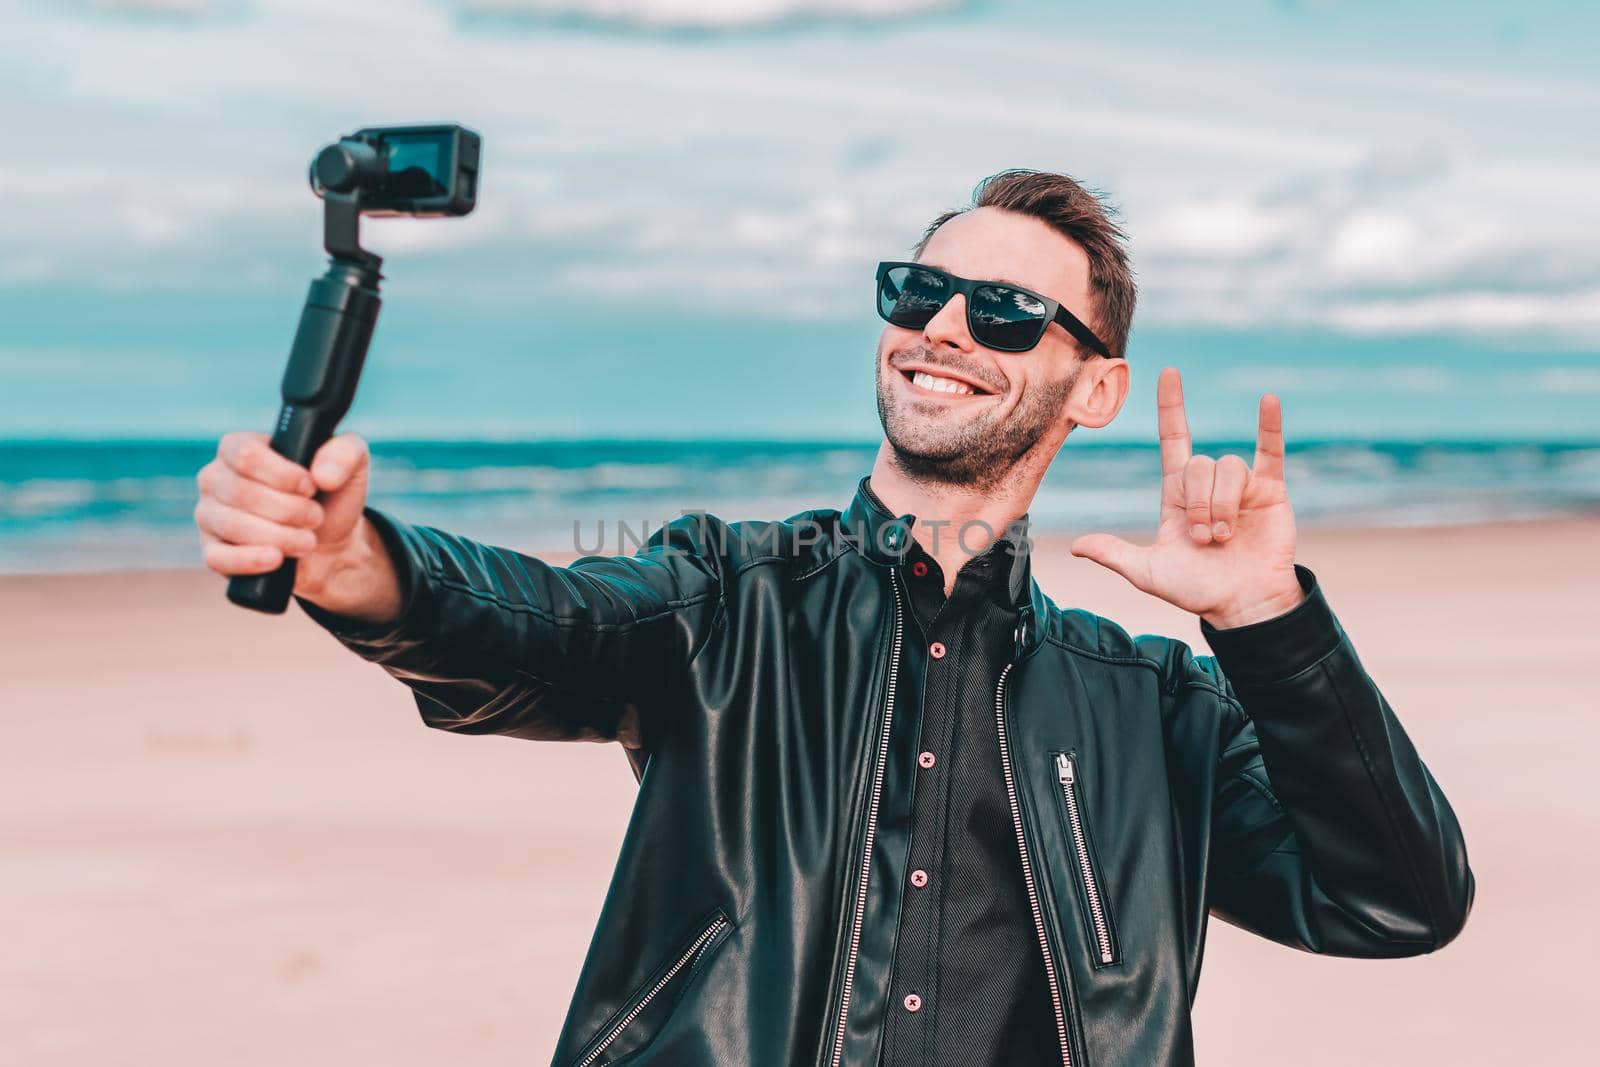 Youthful Blogger in Sunglasses Making Selfie or Streaming Video at the Beach Using Action Camera with Gimbal Camera Stabilizer. Handsome Man in Black Clothes Making Photo Against the Sea